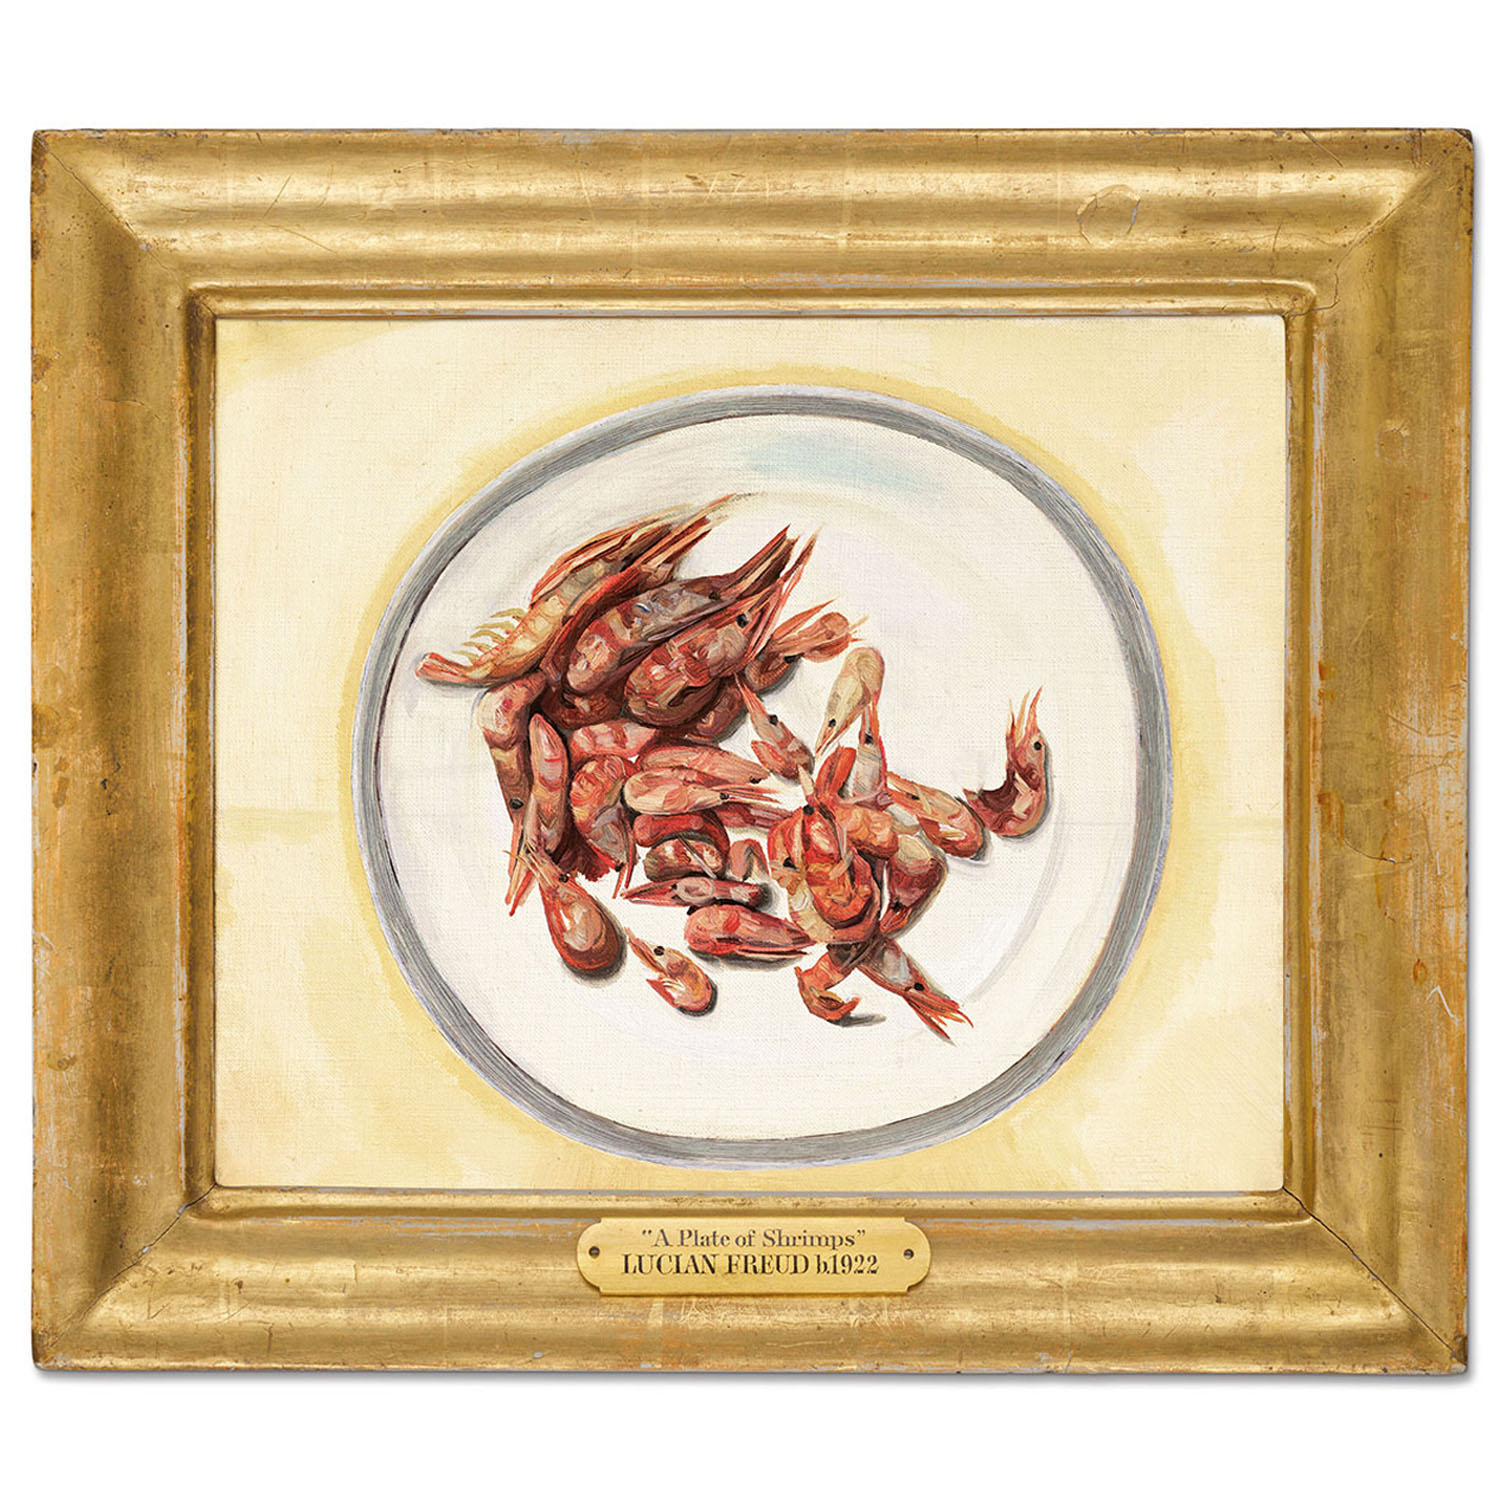 A painting of a plate of shrimps